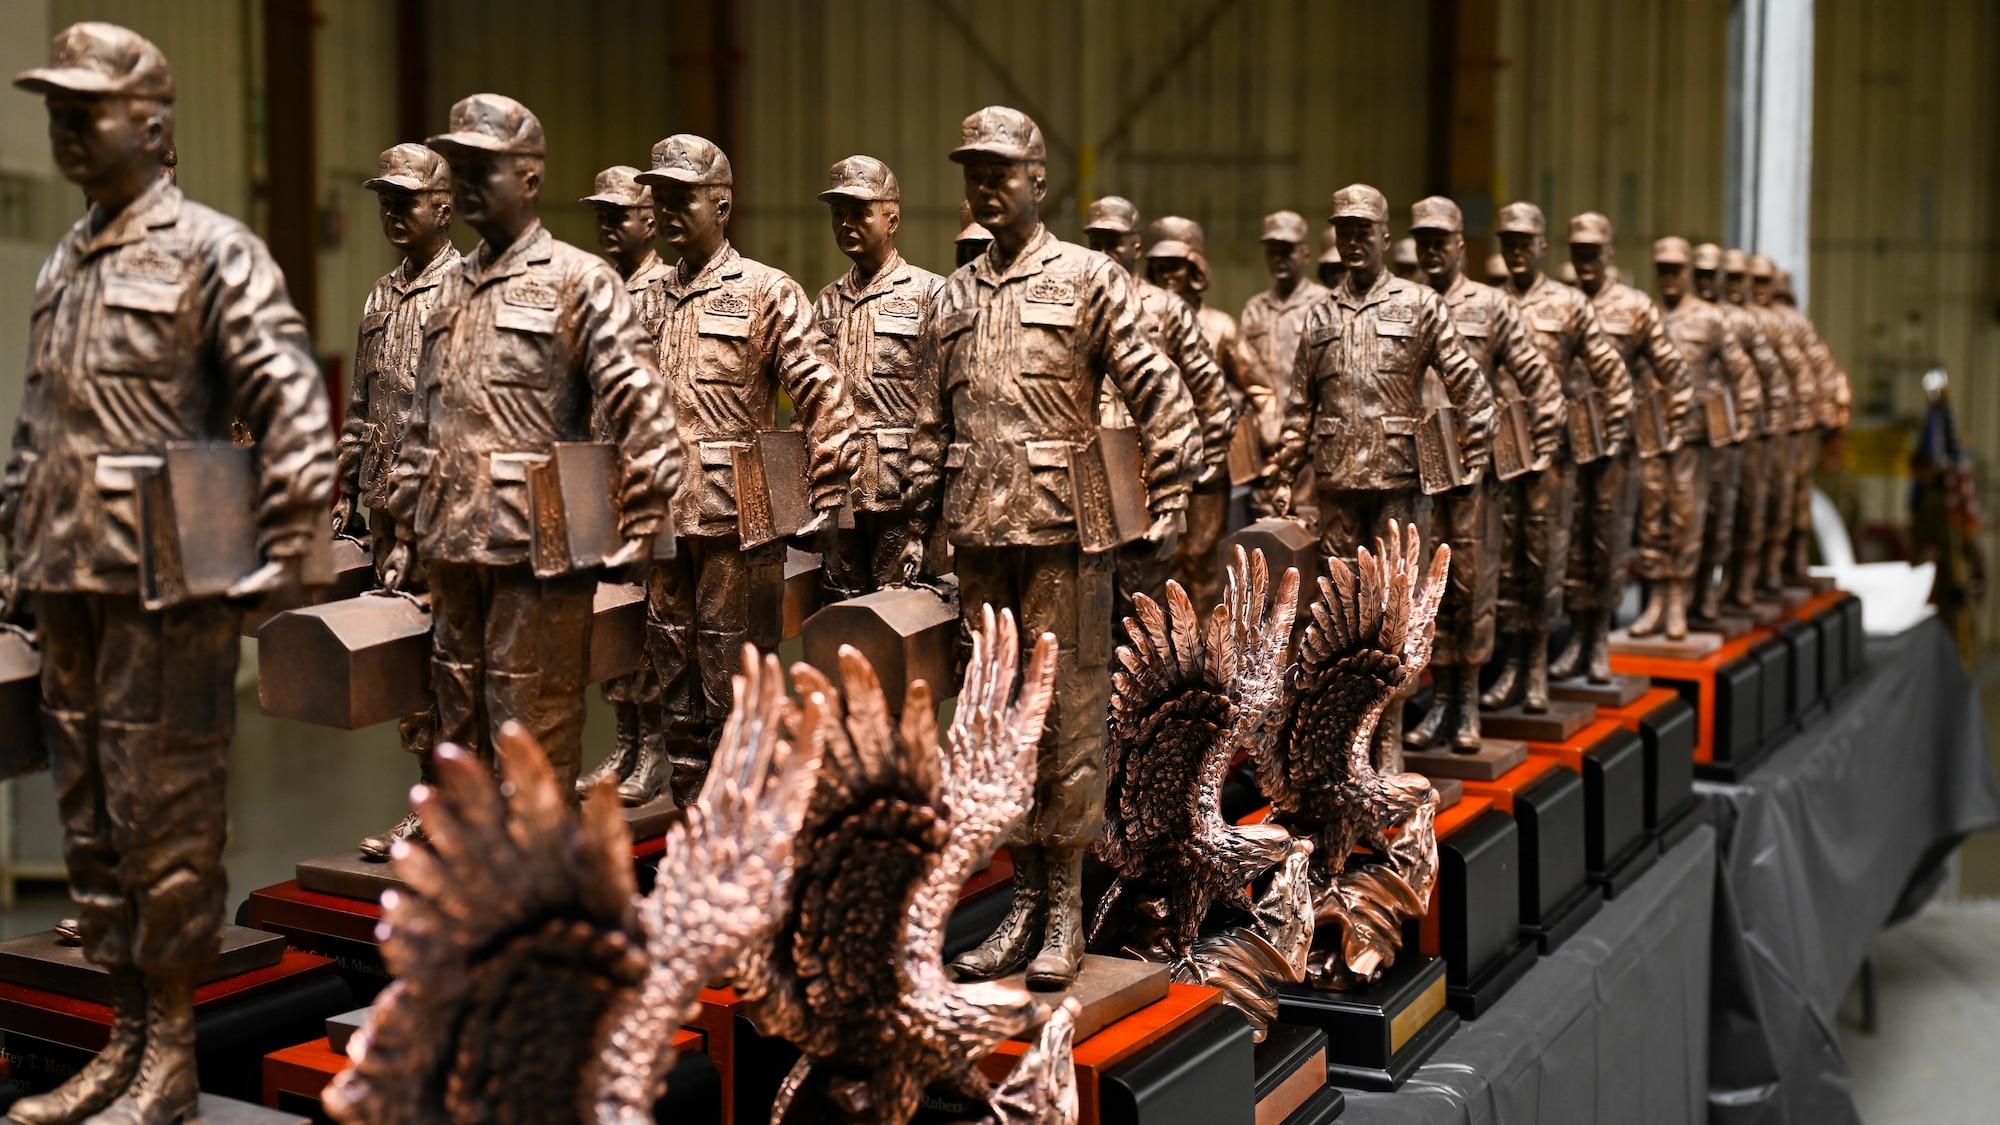 Trophies are displayed and will be awarded at the Maintenance Professional of the Year ceremony at Seymour Johnson Air Force Base, North Carolina, Mar. 08, 2024. The MPOY ceremony recognized Airmen from multiple maintenance career fields and highlighted their accomplishments. (U.S. Air Force photo by Airman Rebecca Tierney)